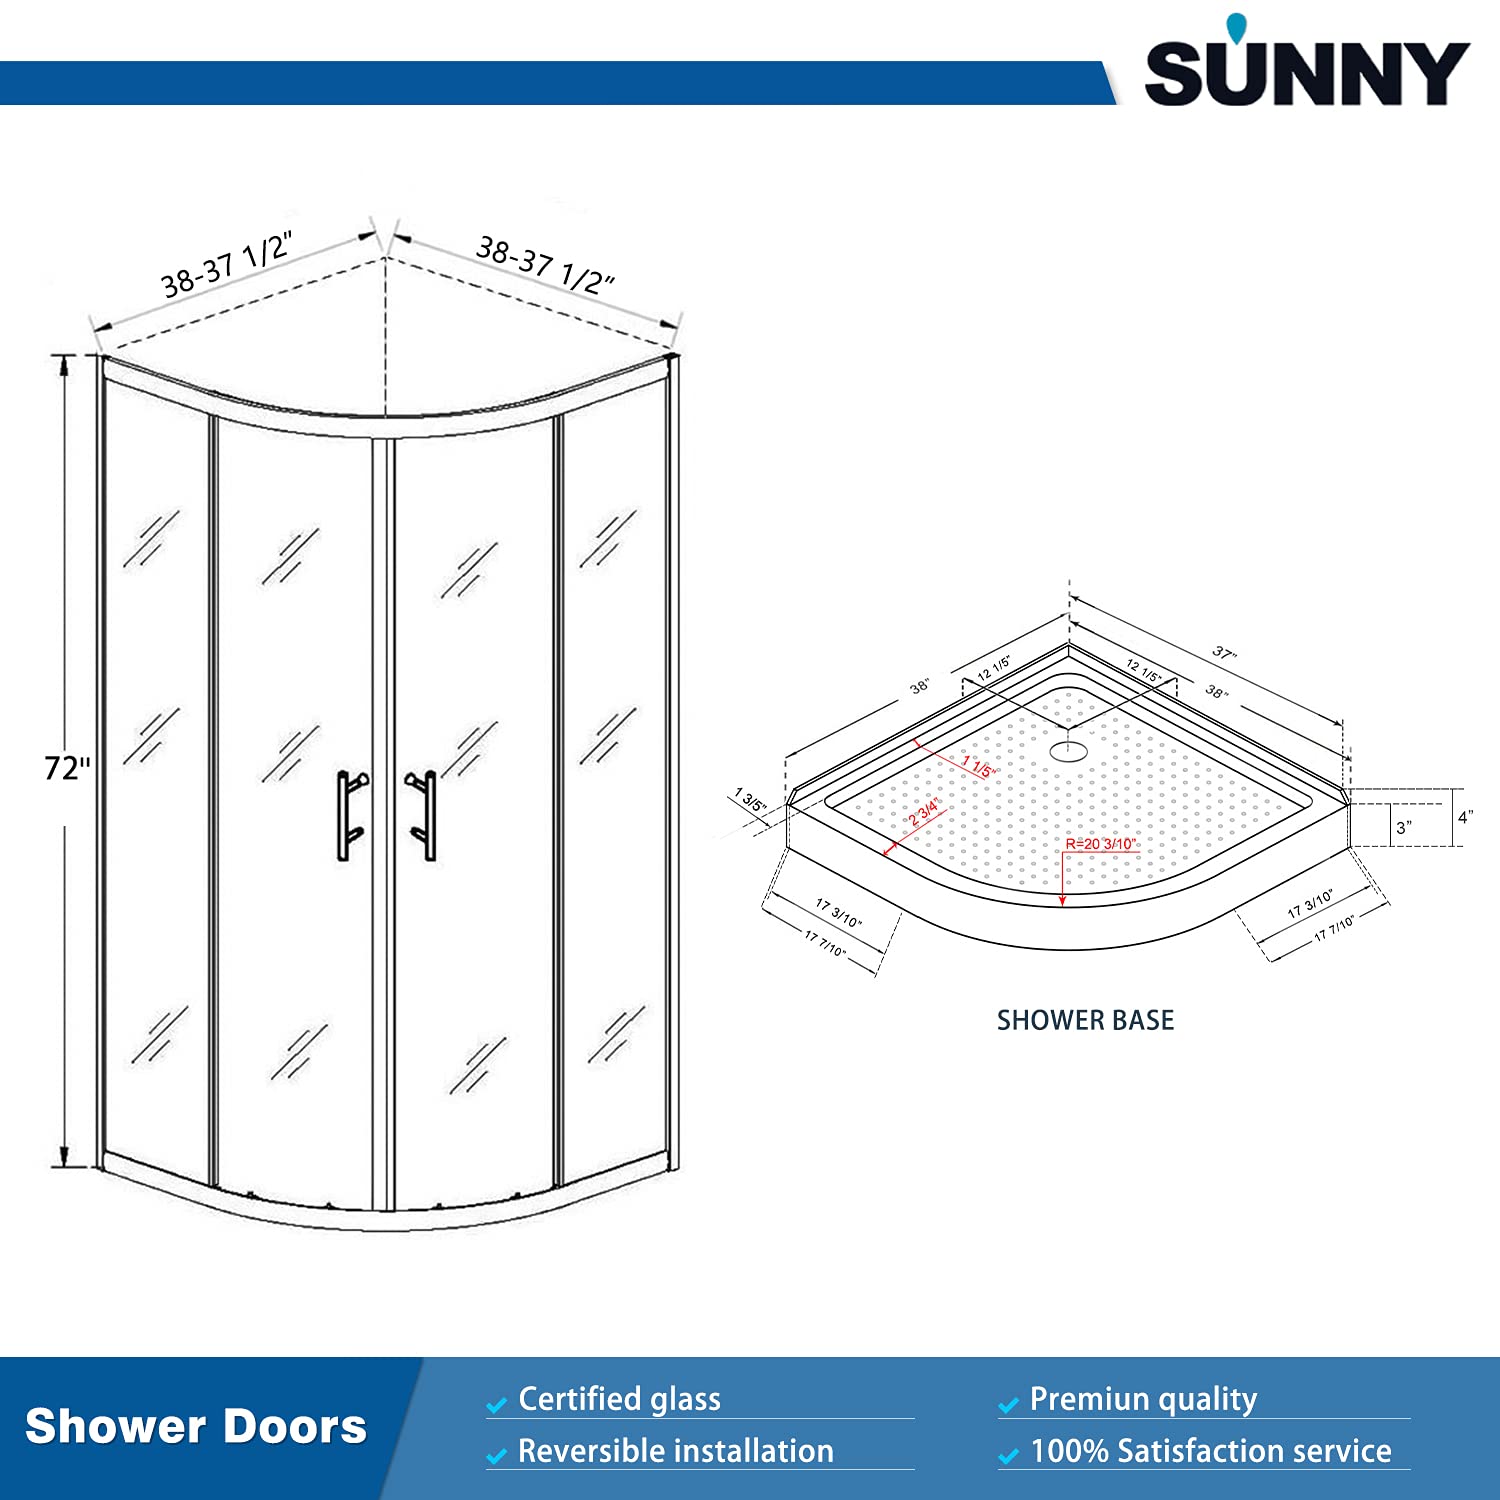 SUNNY SHOWER 38 in. W x 38 in. D x 72 in. H Chrome Finish Quadrant Enclosures With Sliding Doors And White Quadrant Base Dimensions- SUNNY SHOWER